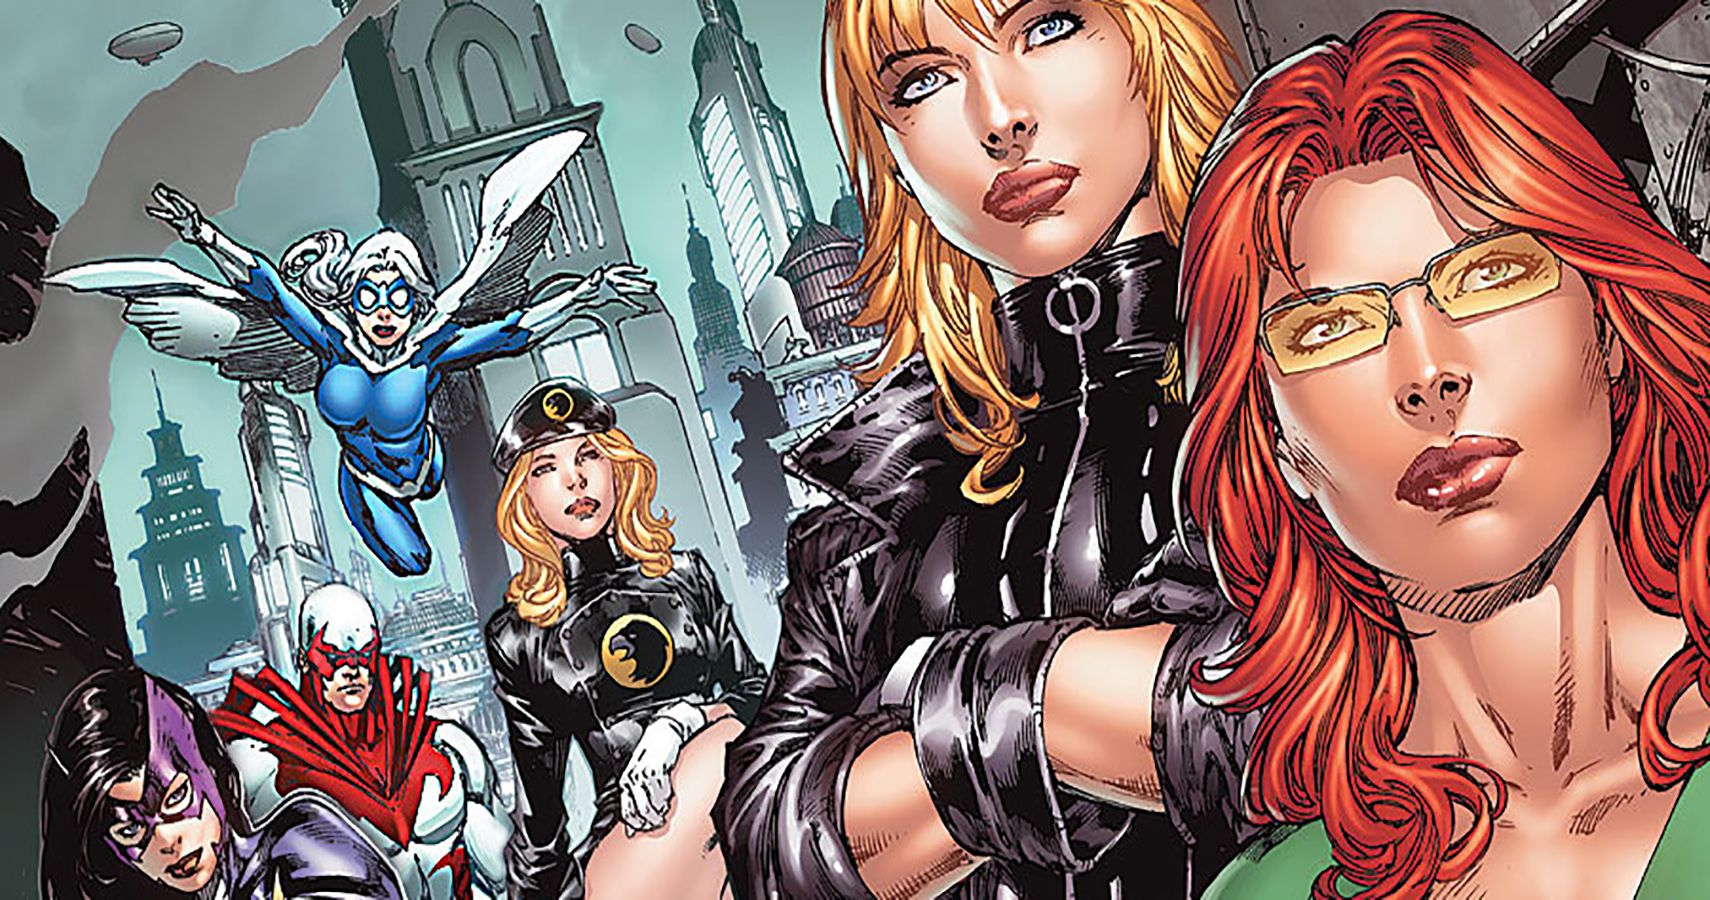 DC's New Birds of Prey Series Includes Some Surprising Members - IGN